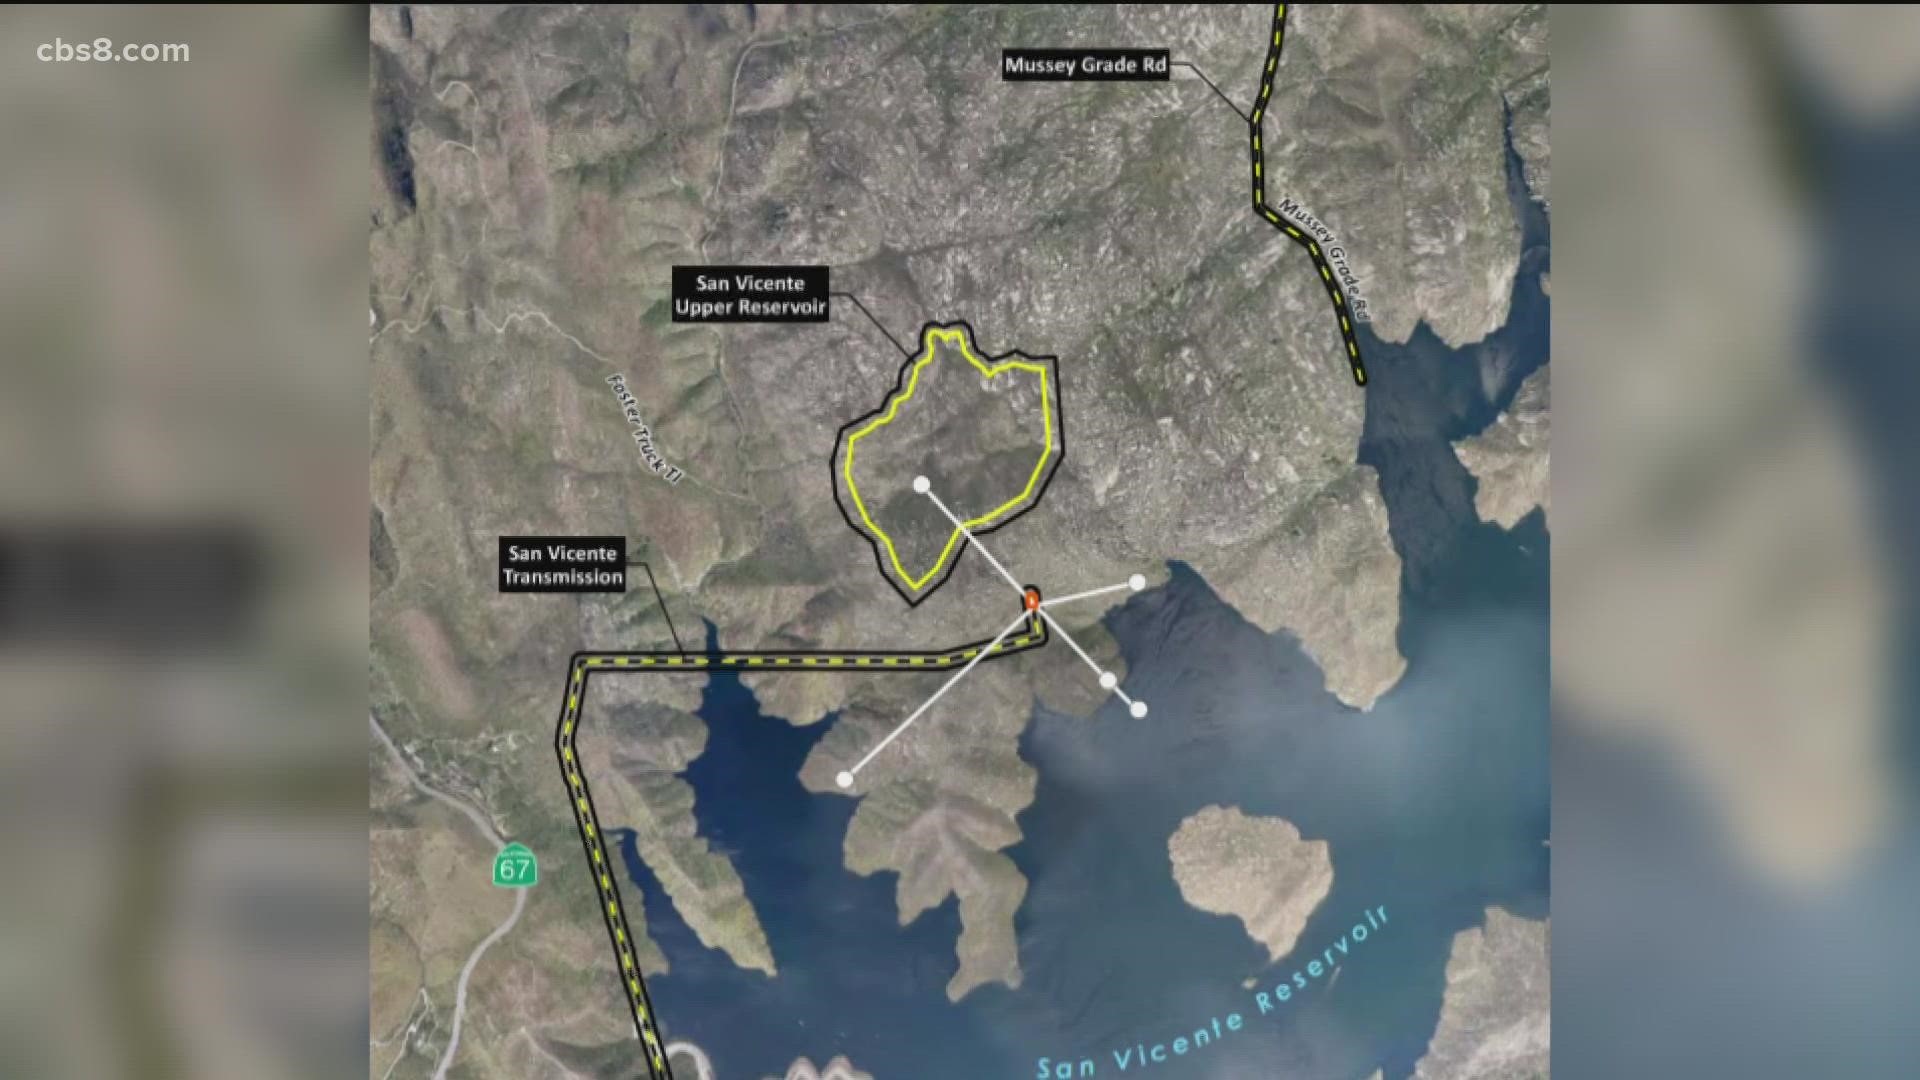 The proposed hydro energy storage facility at the San Vicente Reservoir could generate enough energy for about 135,000 households.